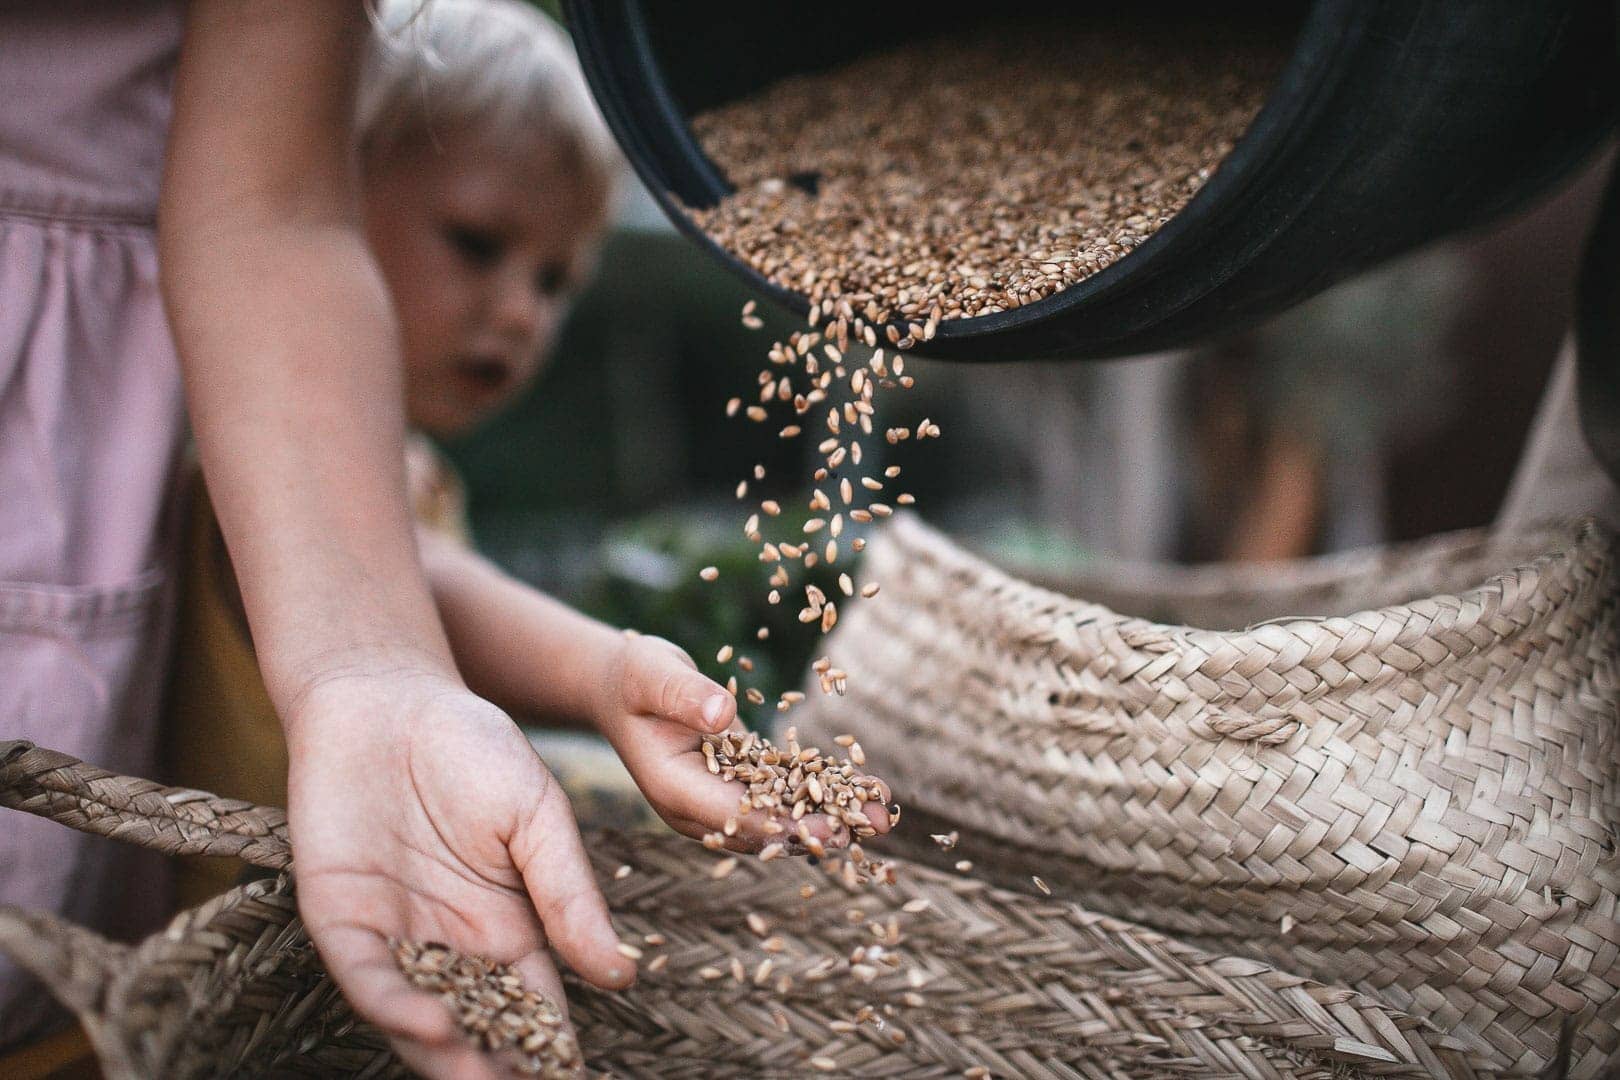 Photographic detail of two children playing with wheat seeds.